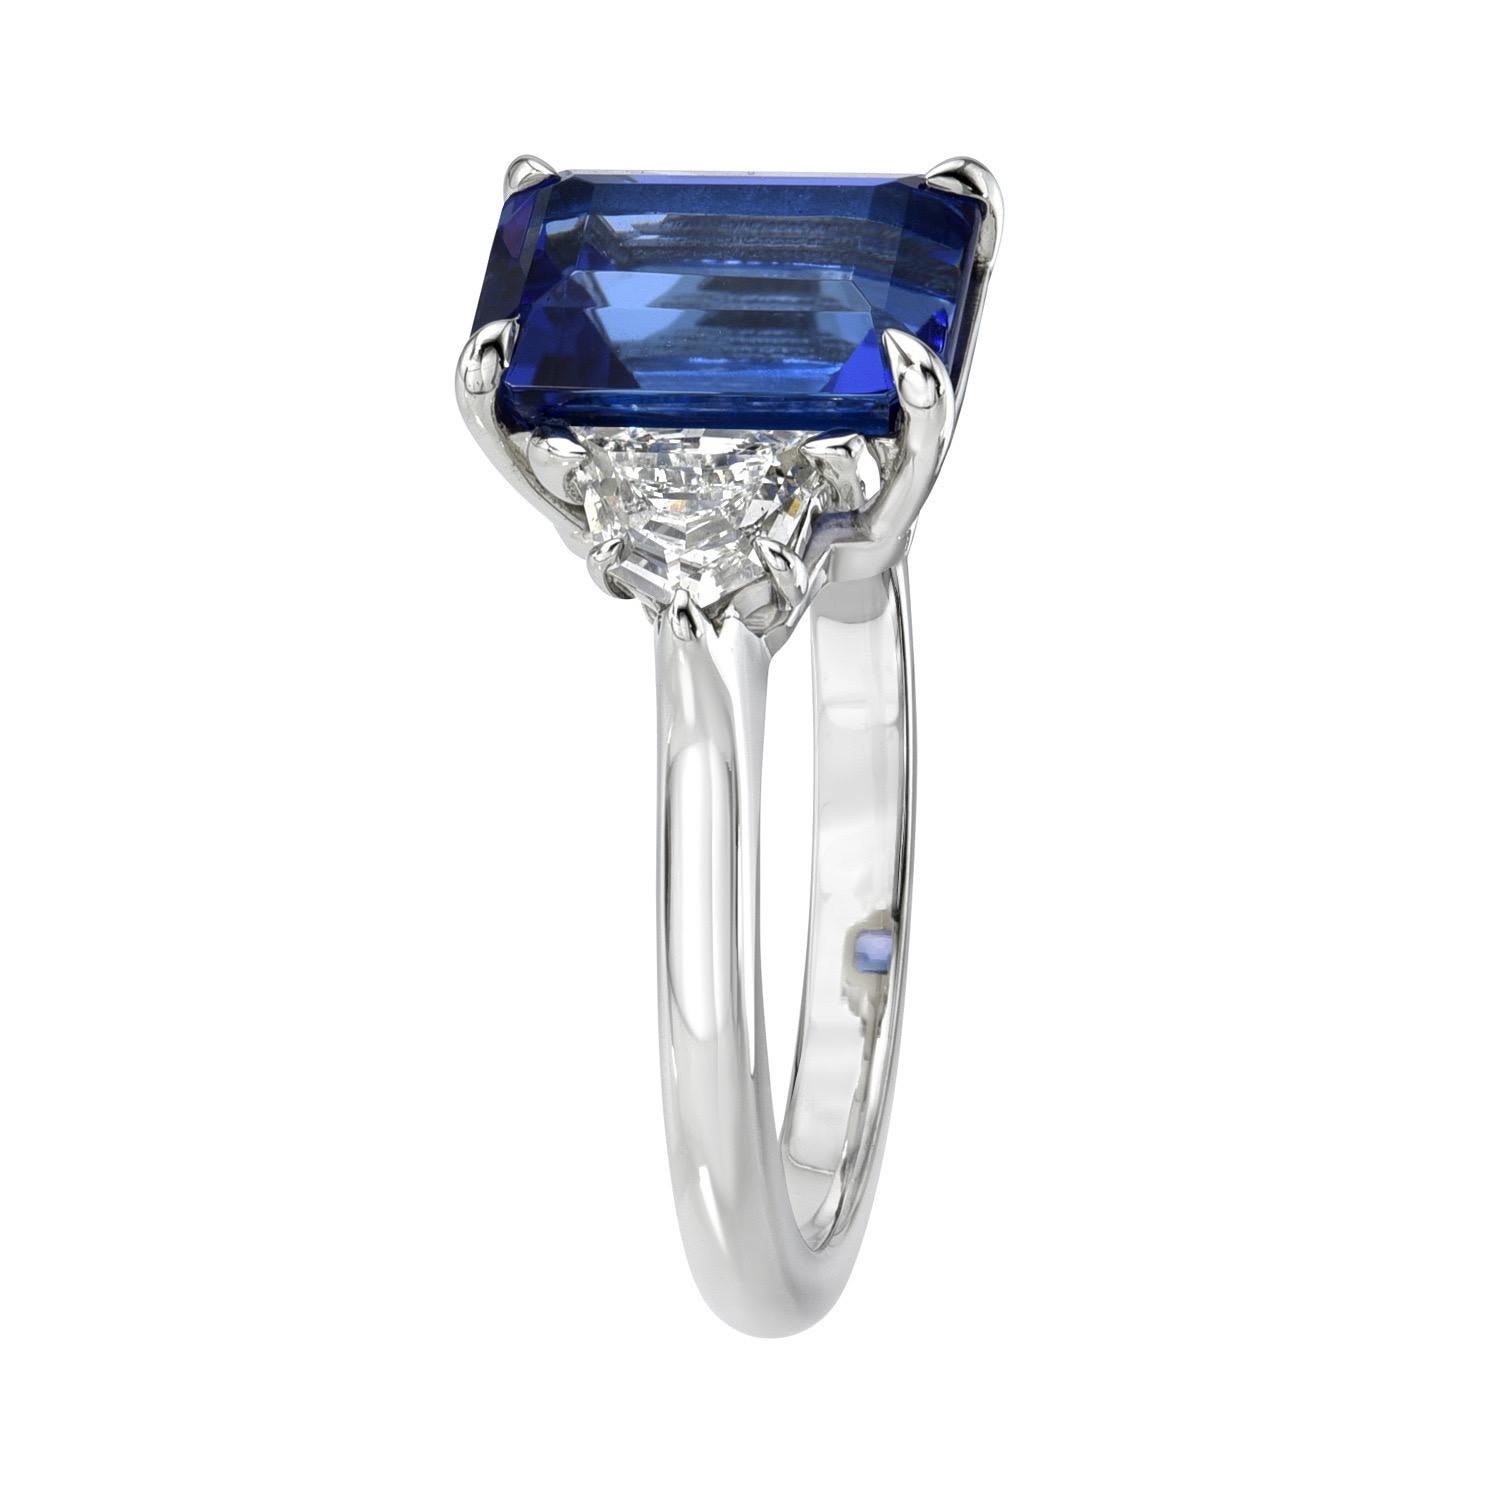 Claasic 3.57 carat Tanzanite Emerald-Cut, three stone platinum ring, flanked by a pair of 0.61 carat, H/SI1 